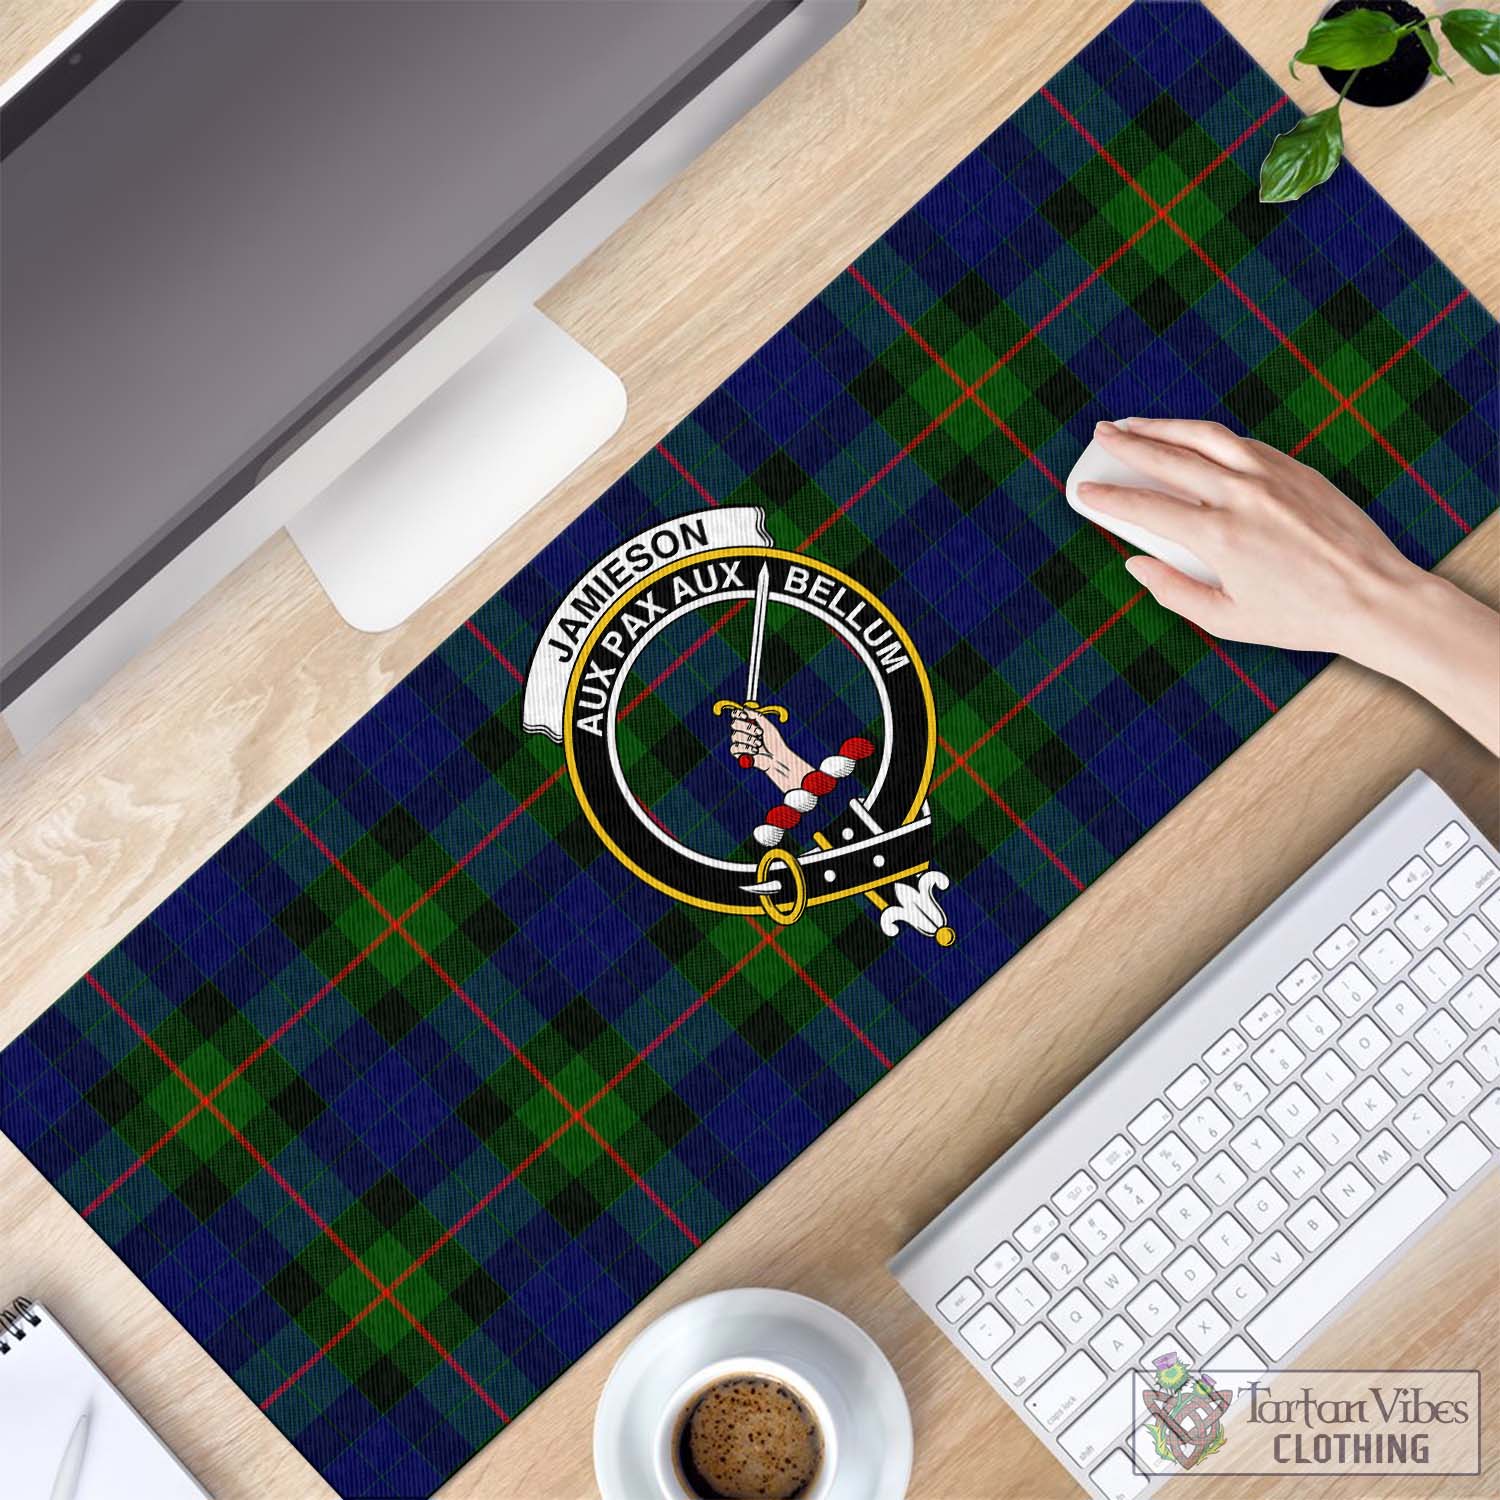 Tartan Vibes Clothing Jamieson Tartan Mouse Pad with Family Crest